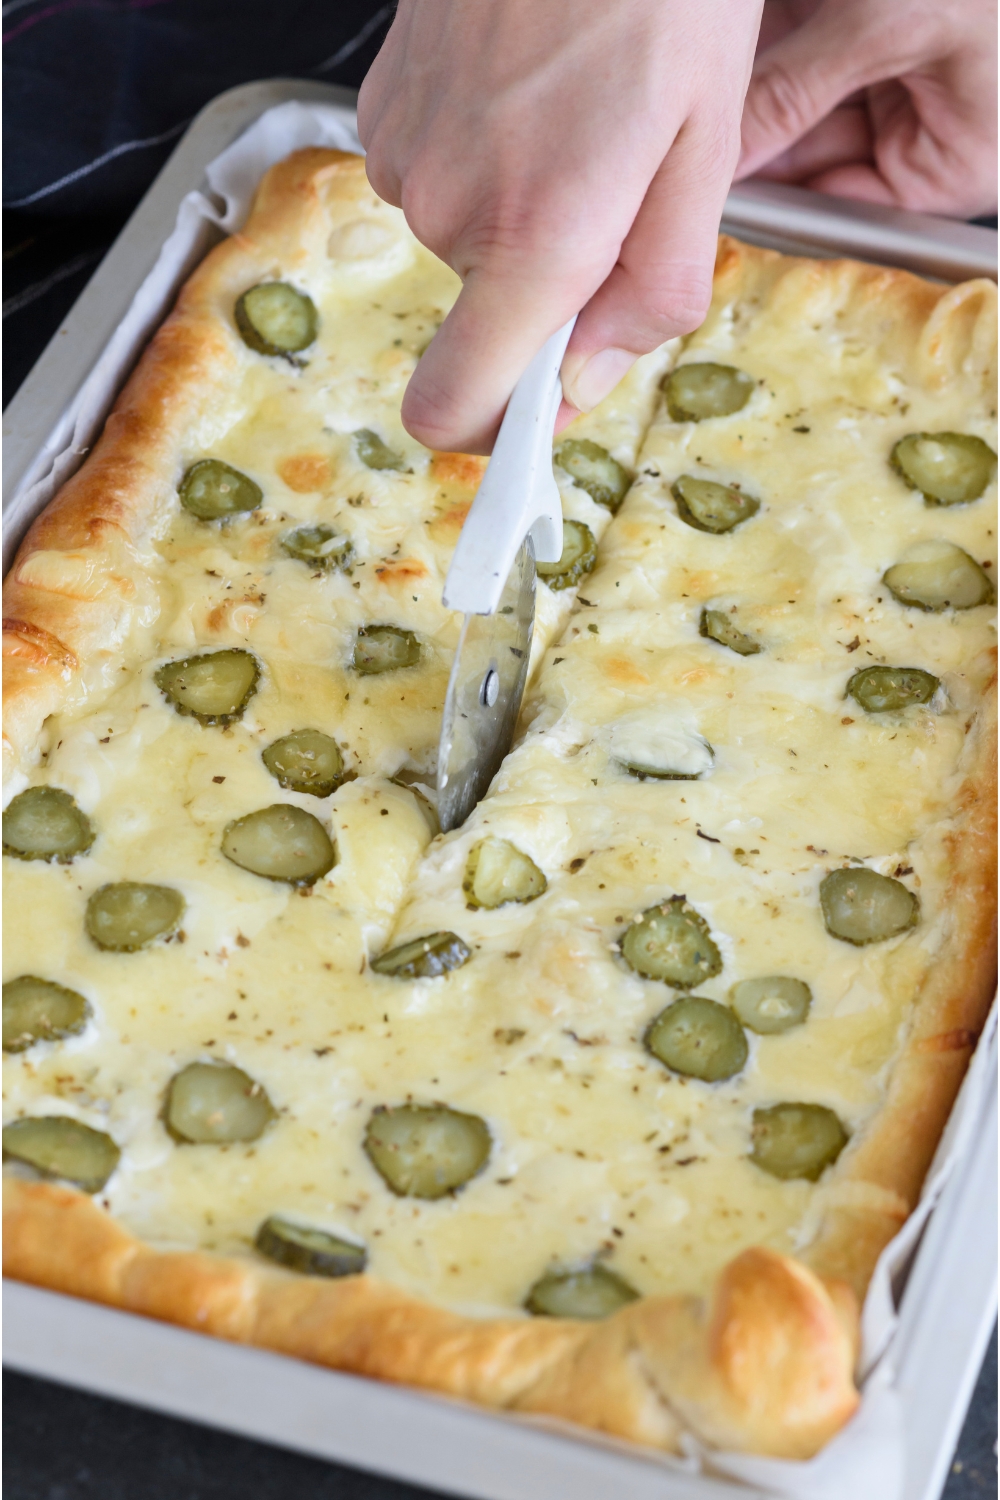 Pickle pizza being sliced using a pizza cutter.